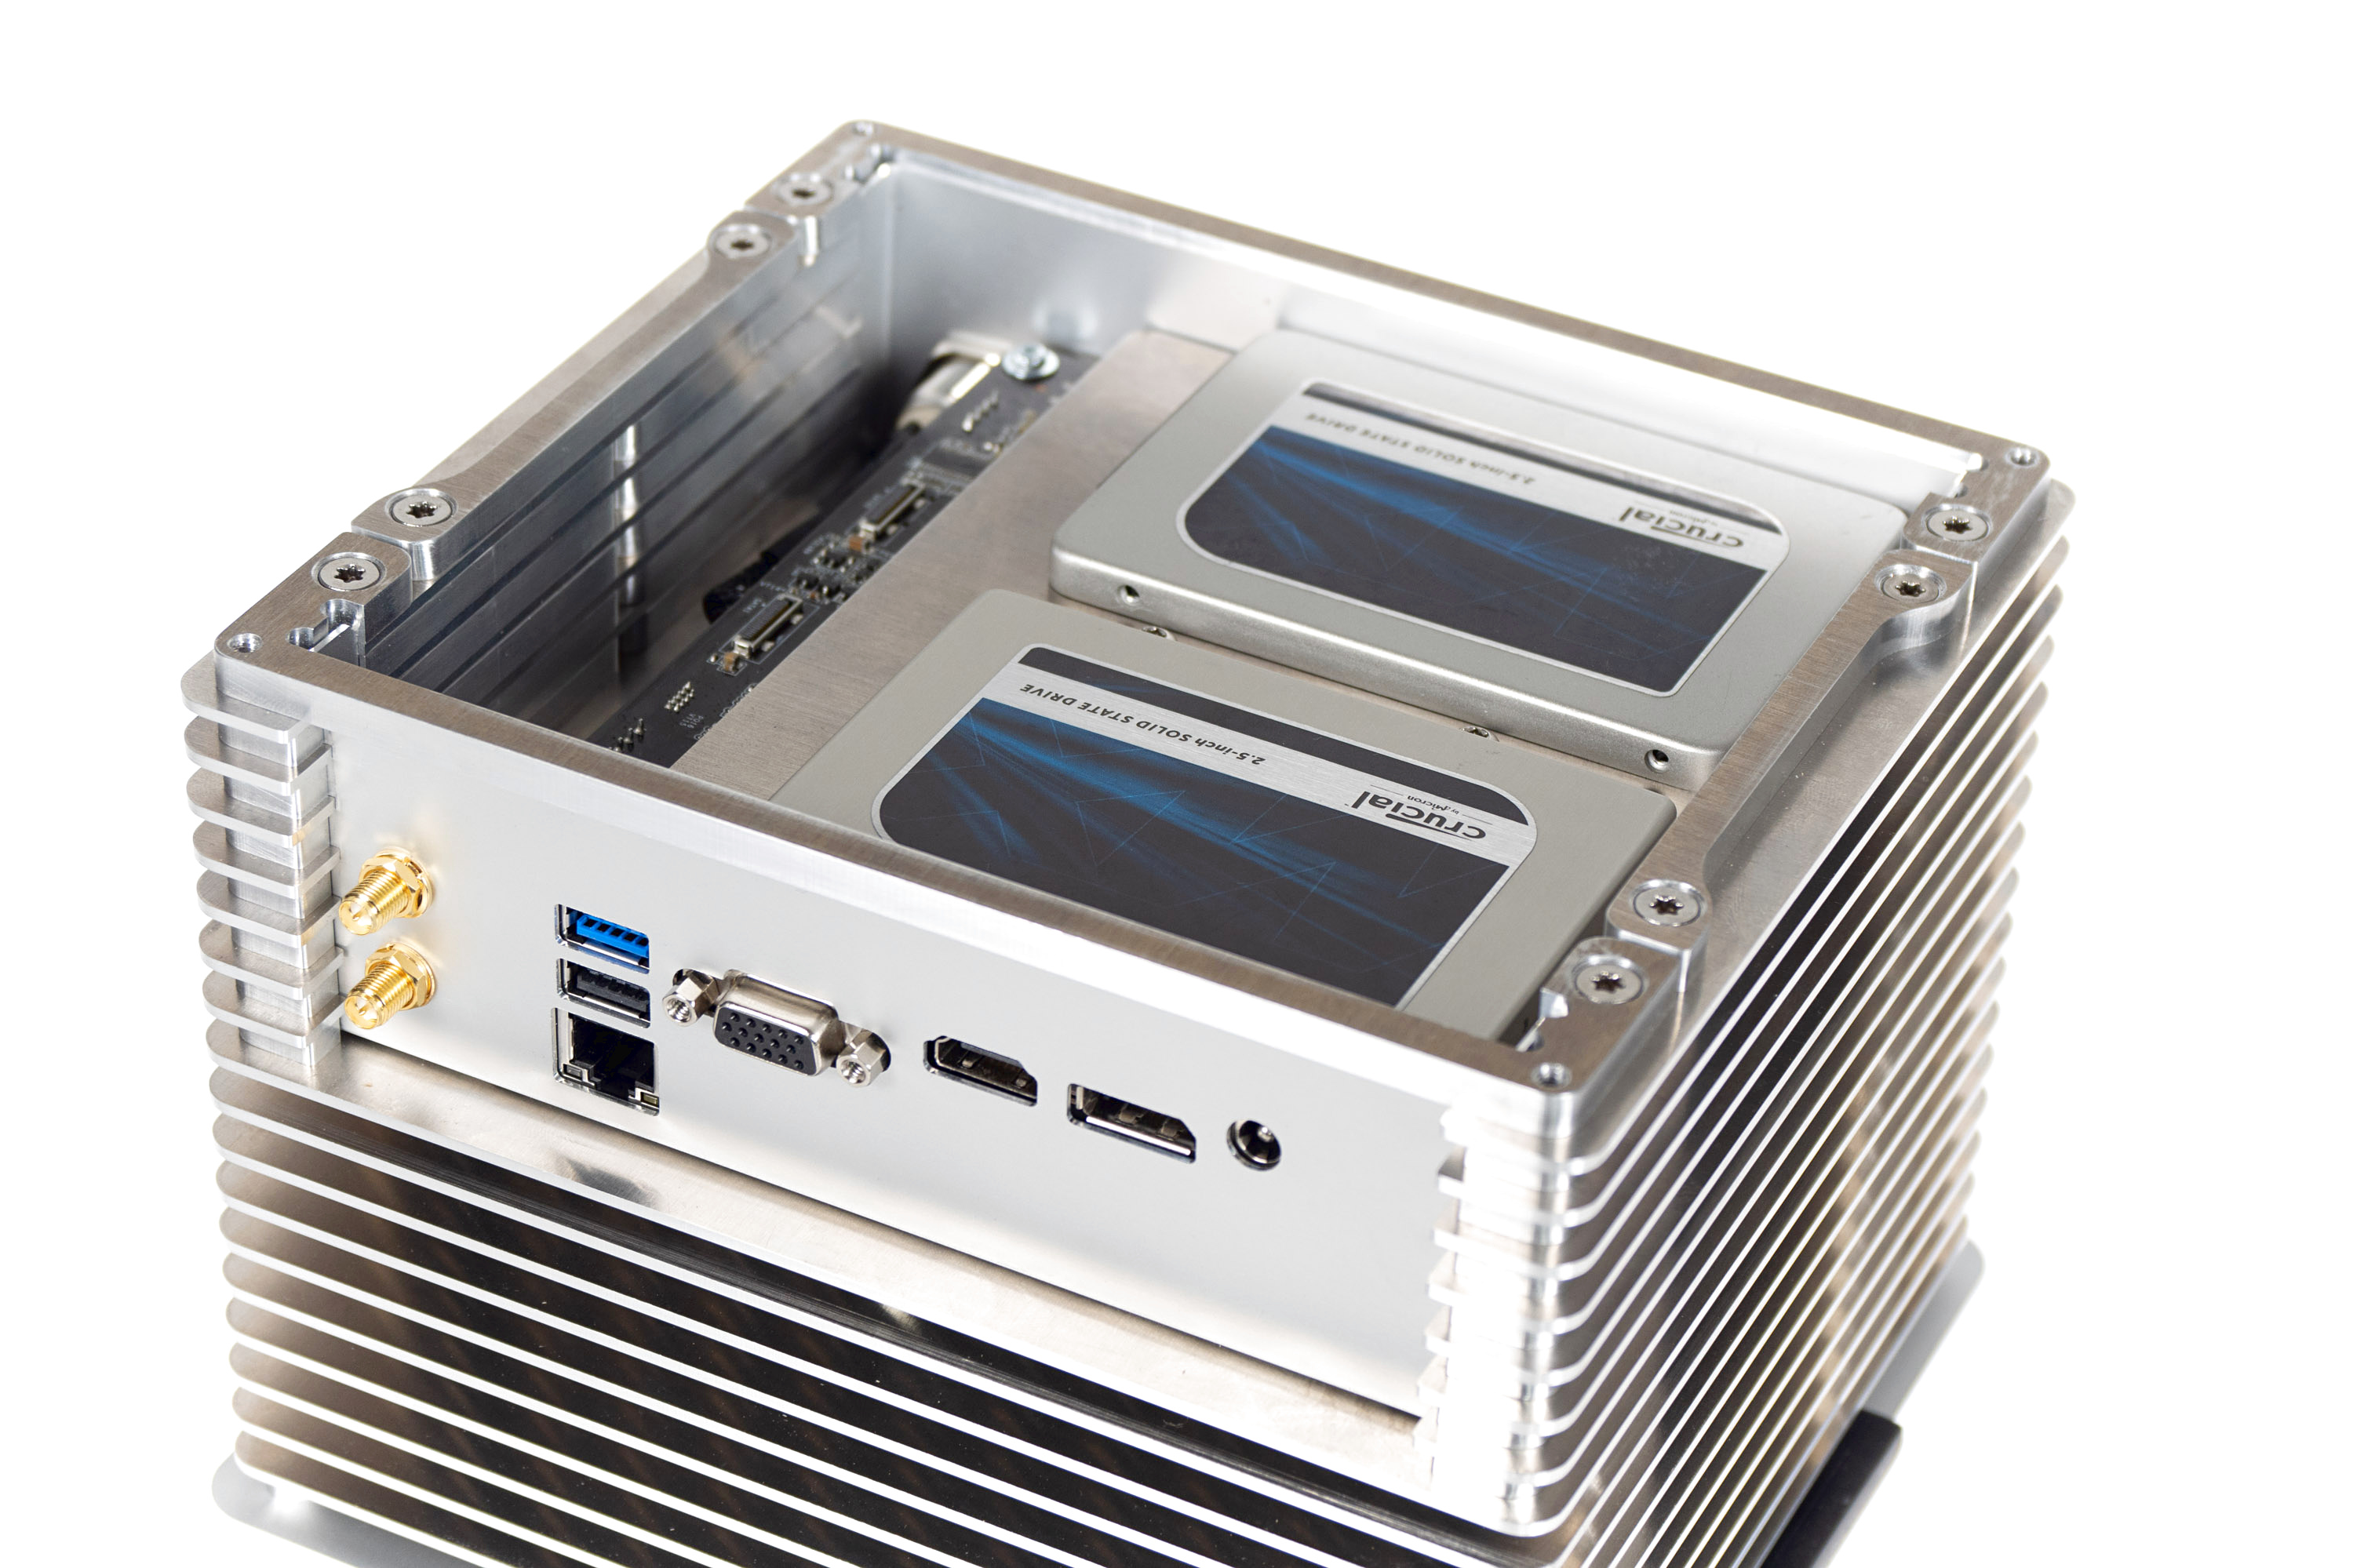 cirrus7 - fanless mini-PCs - made in Germany